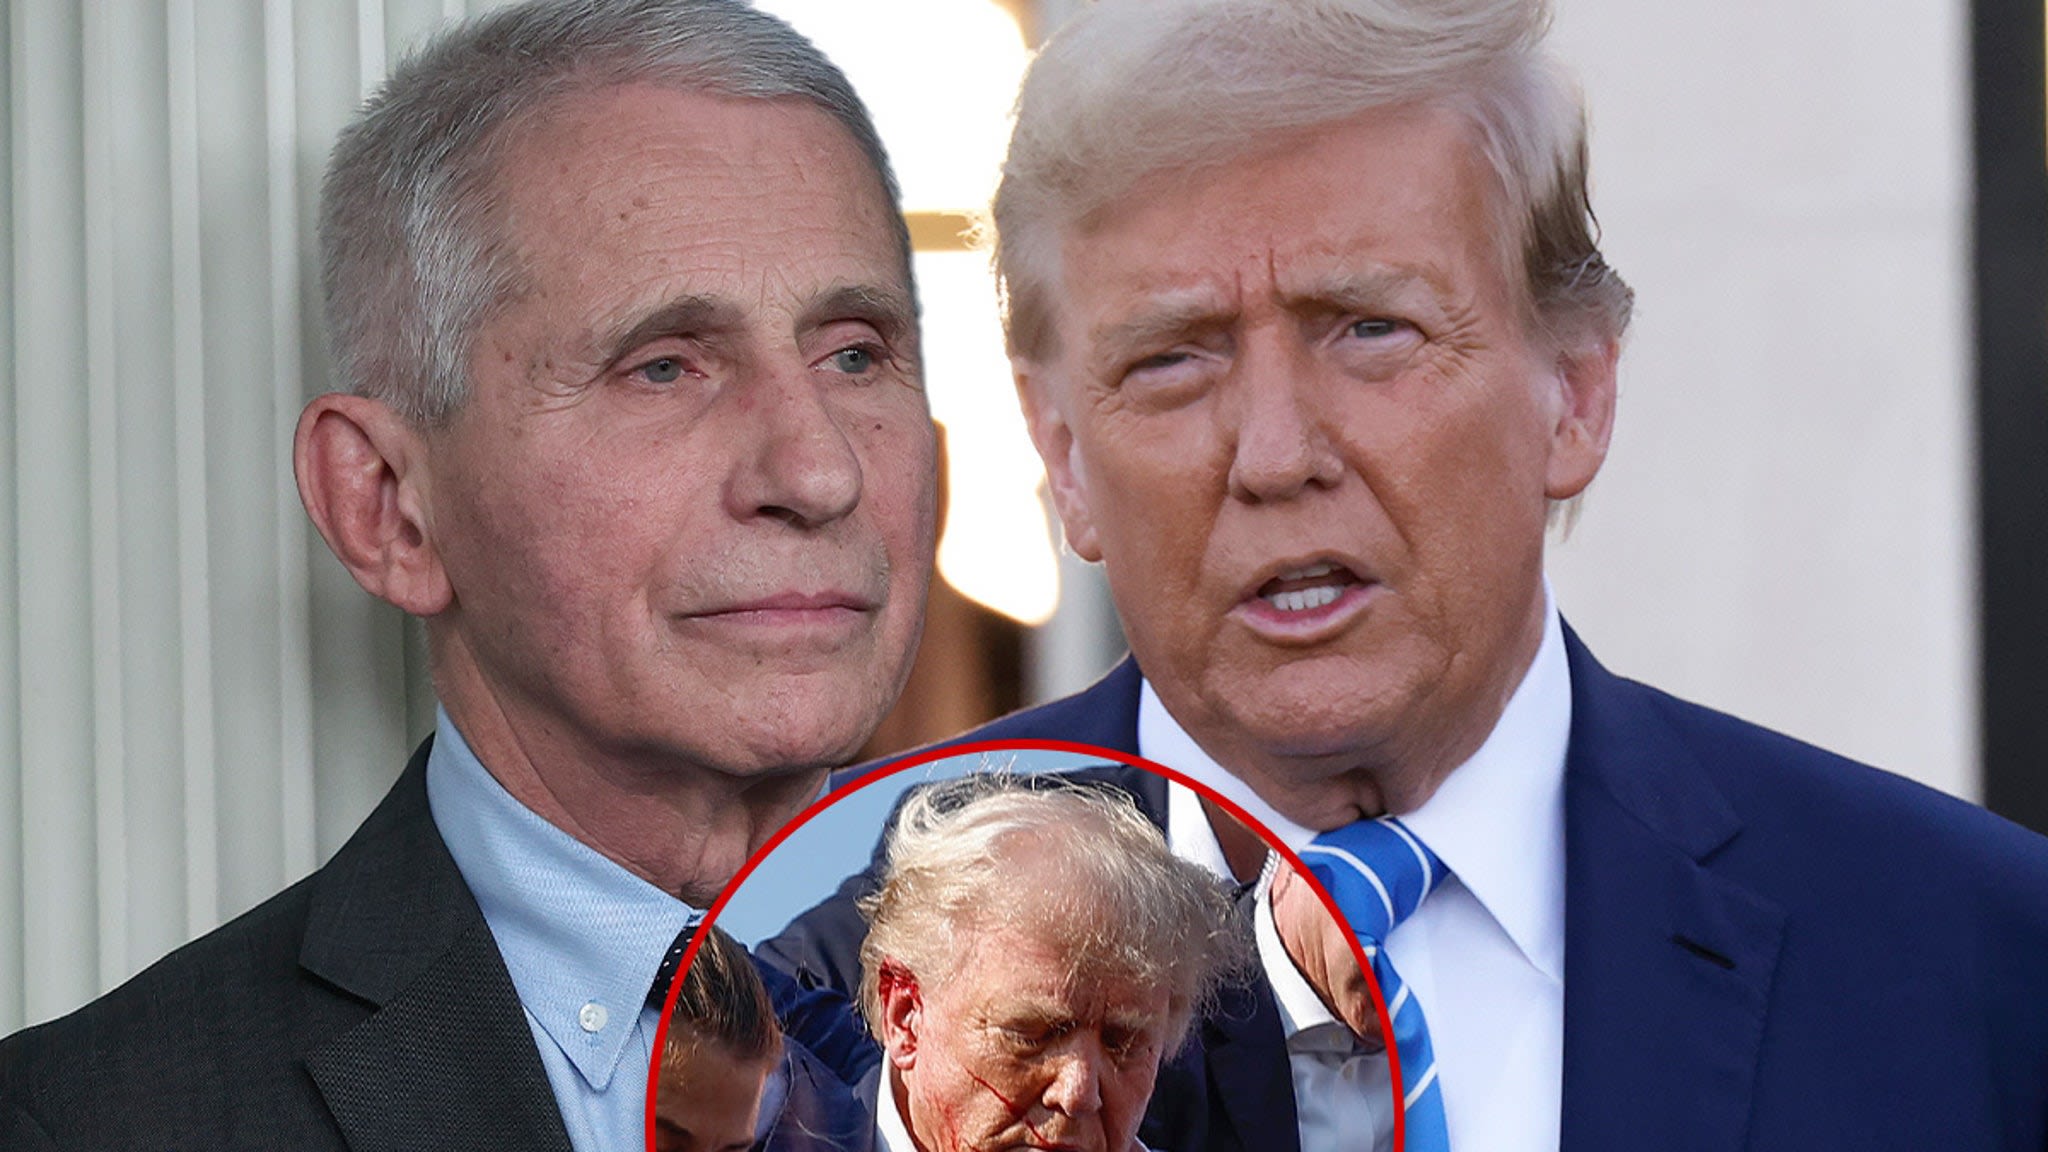 Dr. Fauci Plays Down Donald Trump's Injuries After Attempted Assassination